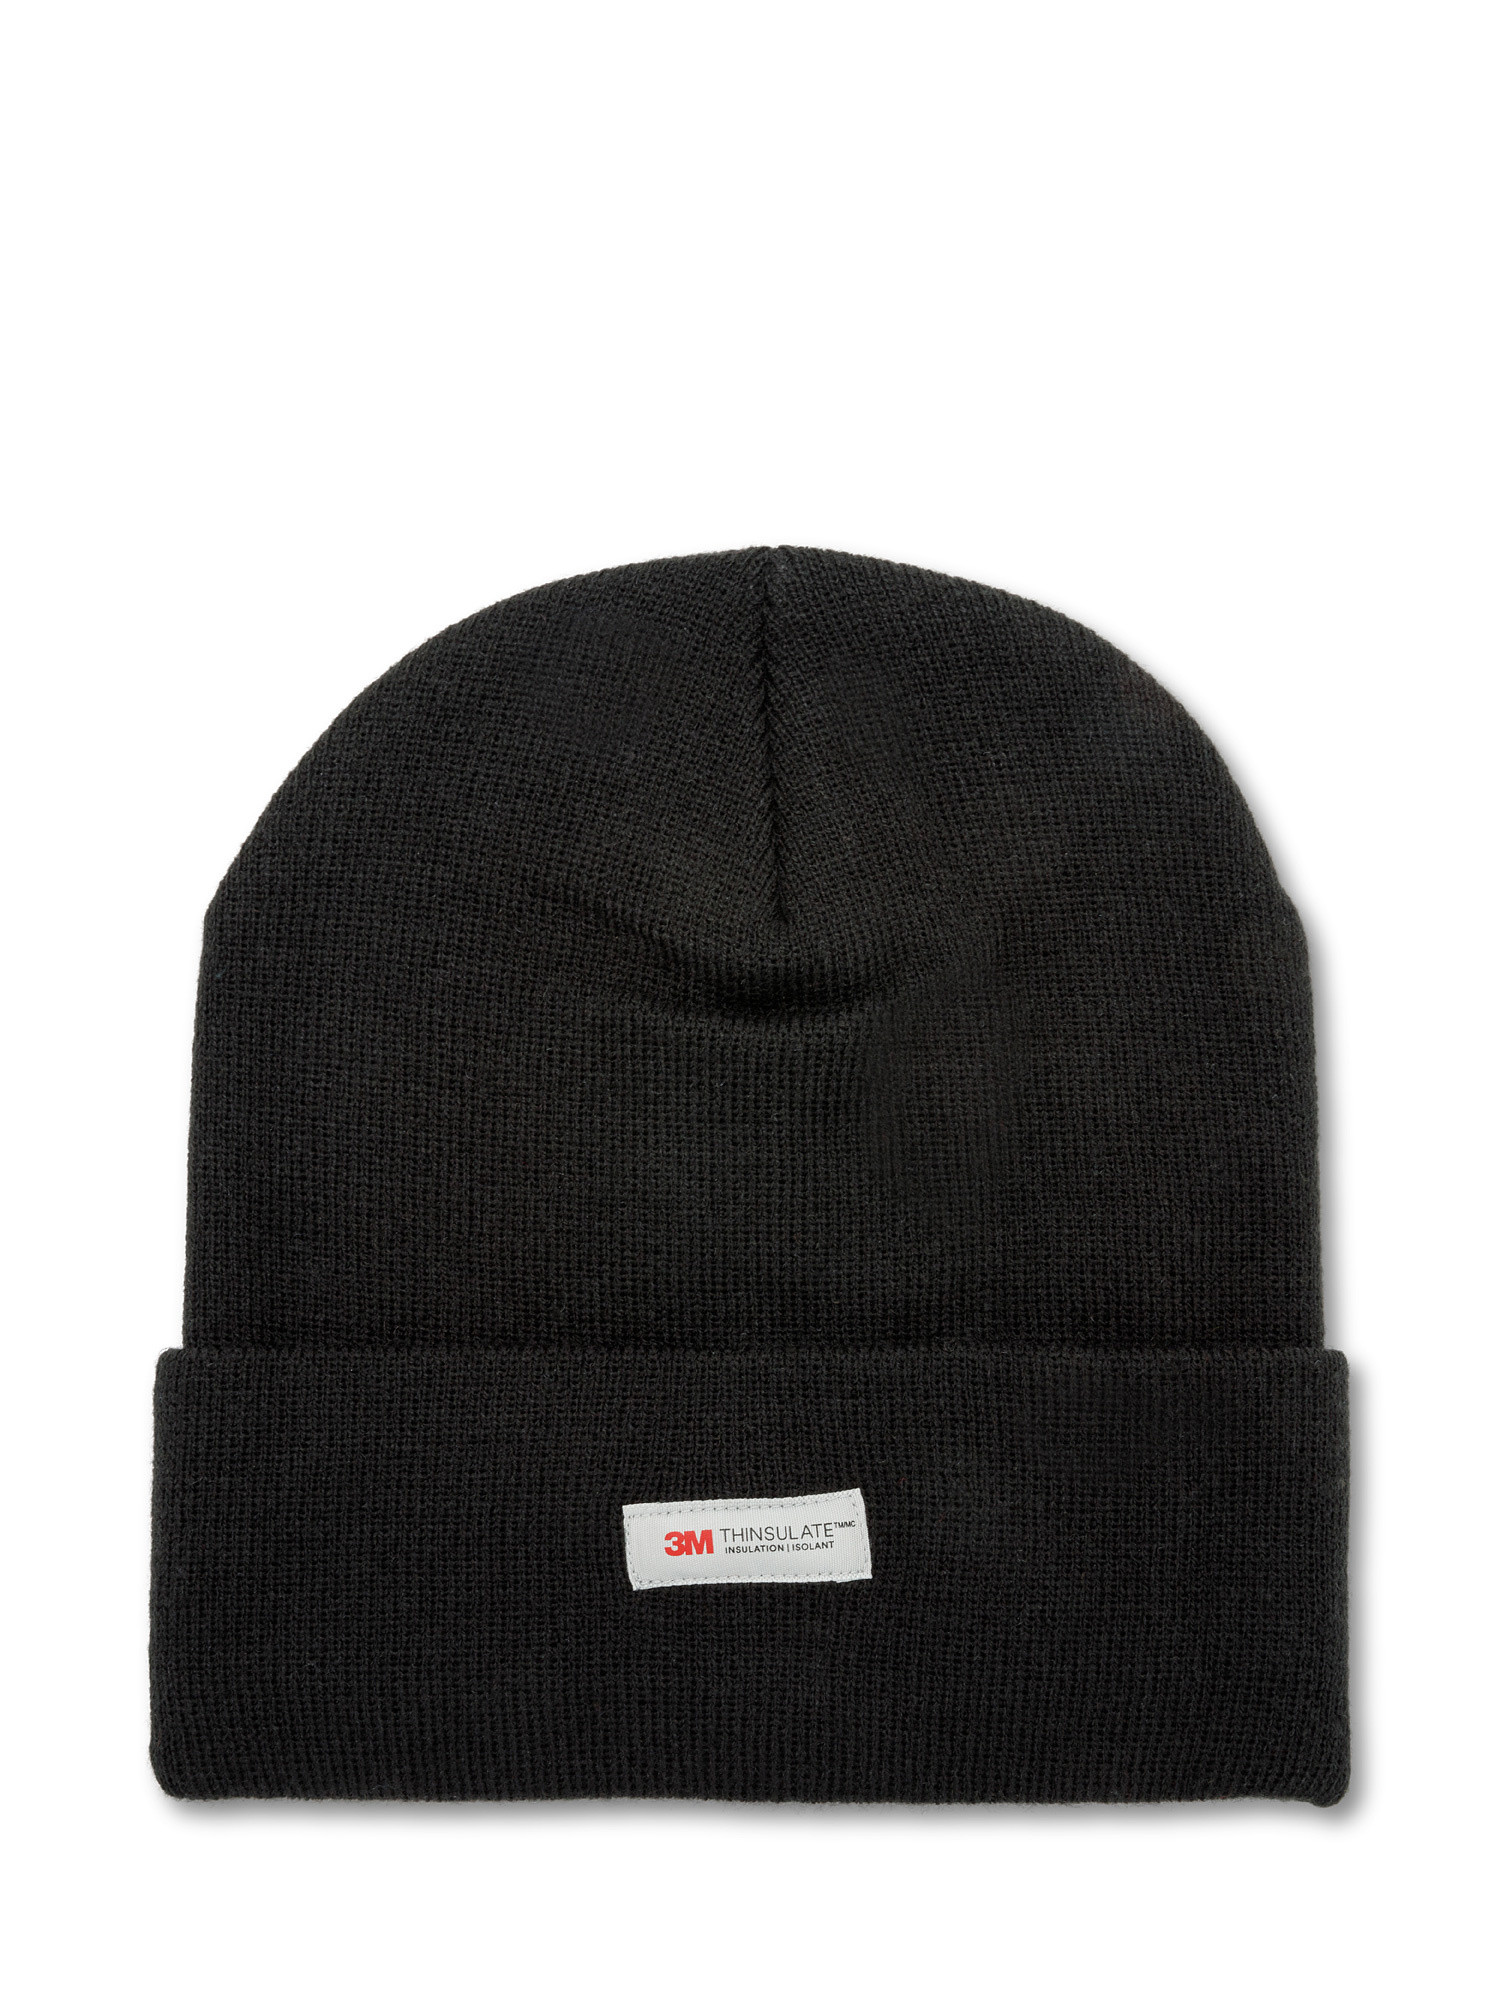 Thinsulate cap, Black, large image number 0